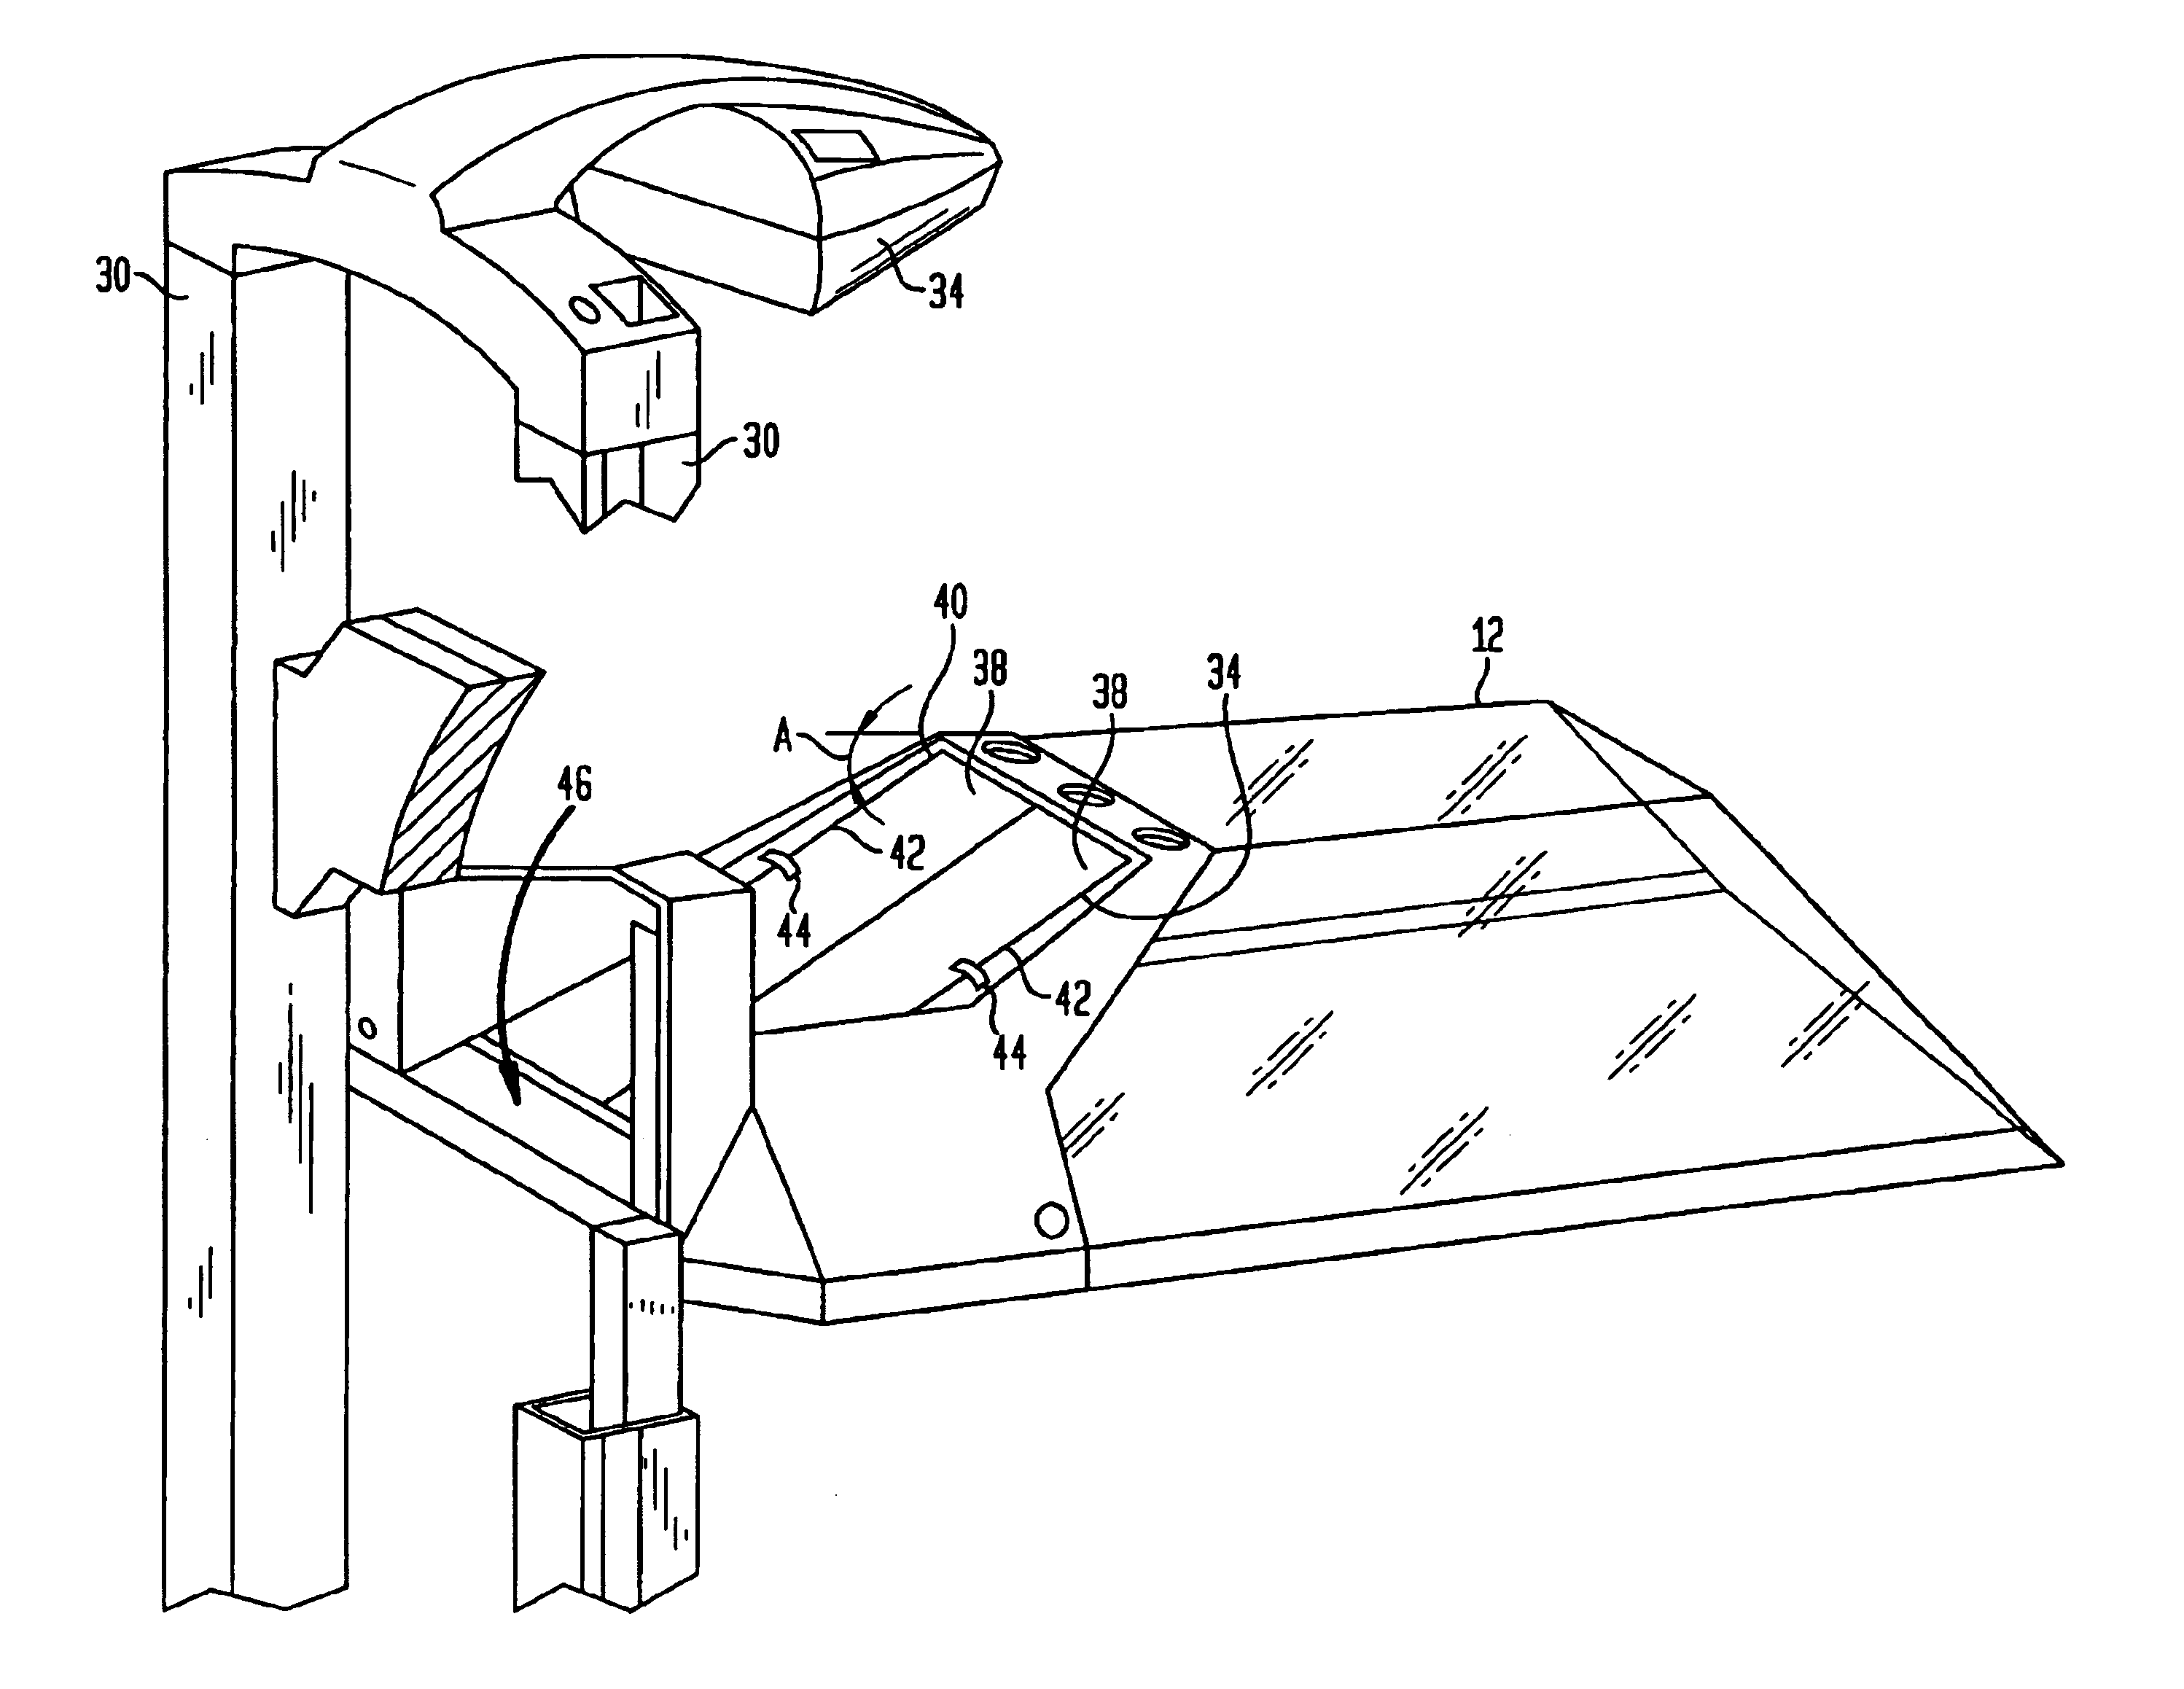 Infant care apparatus with object detection sensing